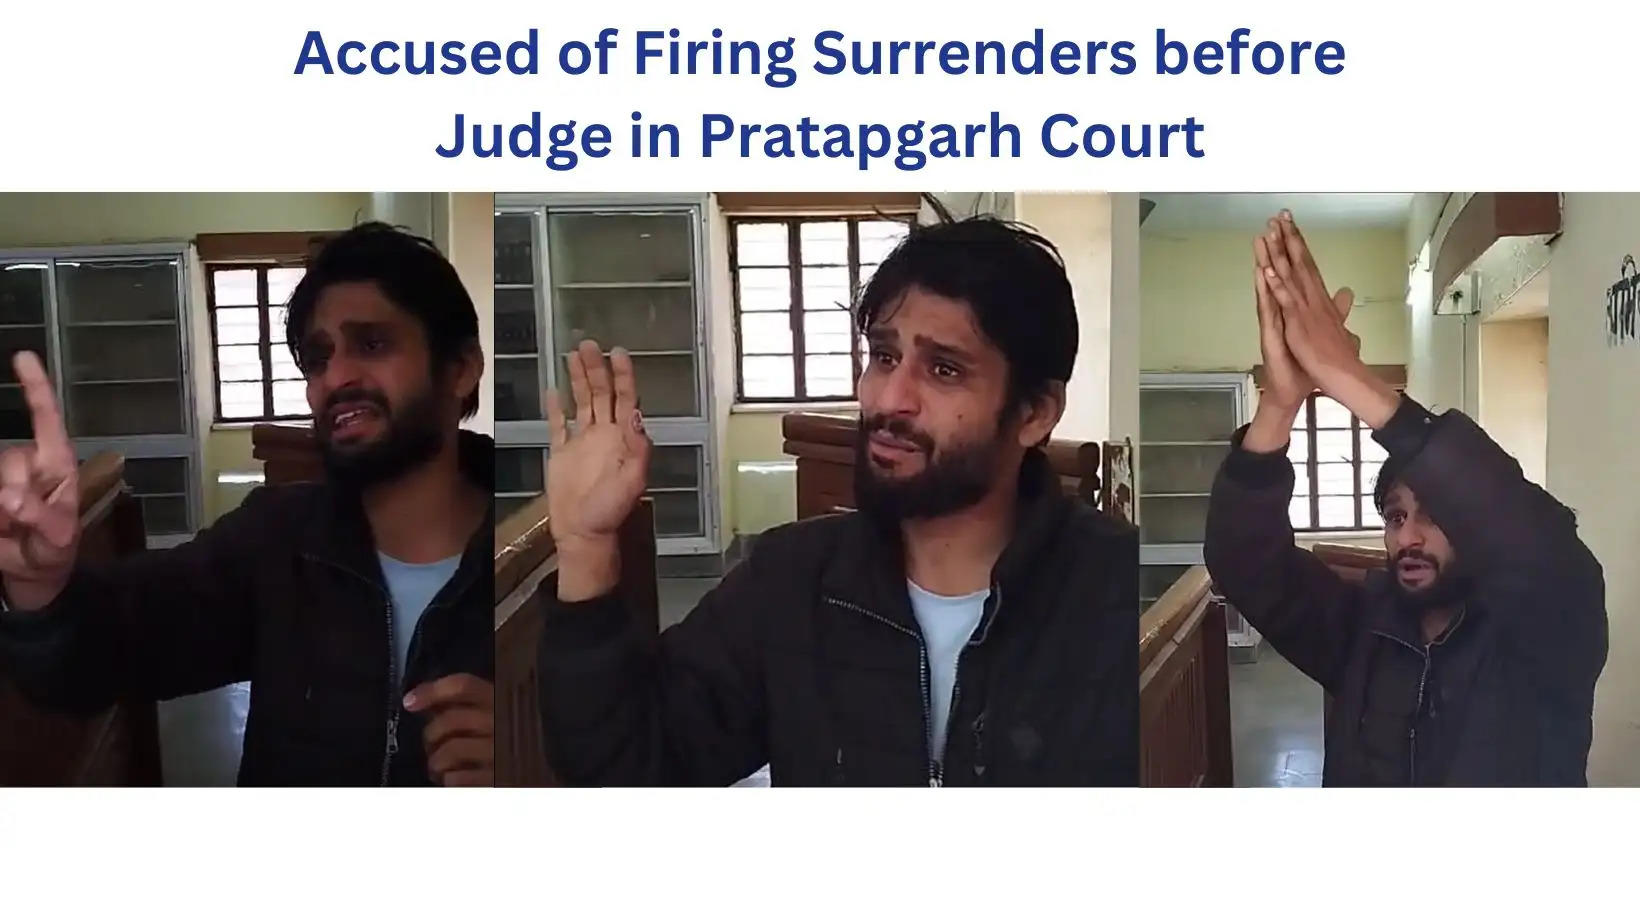 Man Surrenders before Judge in Pratapgarh Court, Places Pistol on Desk - Security lapse in Court